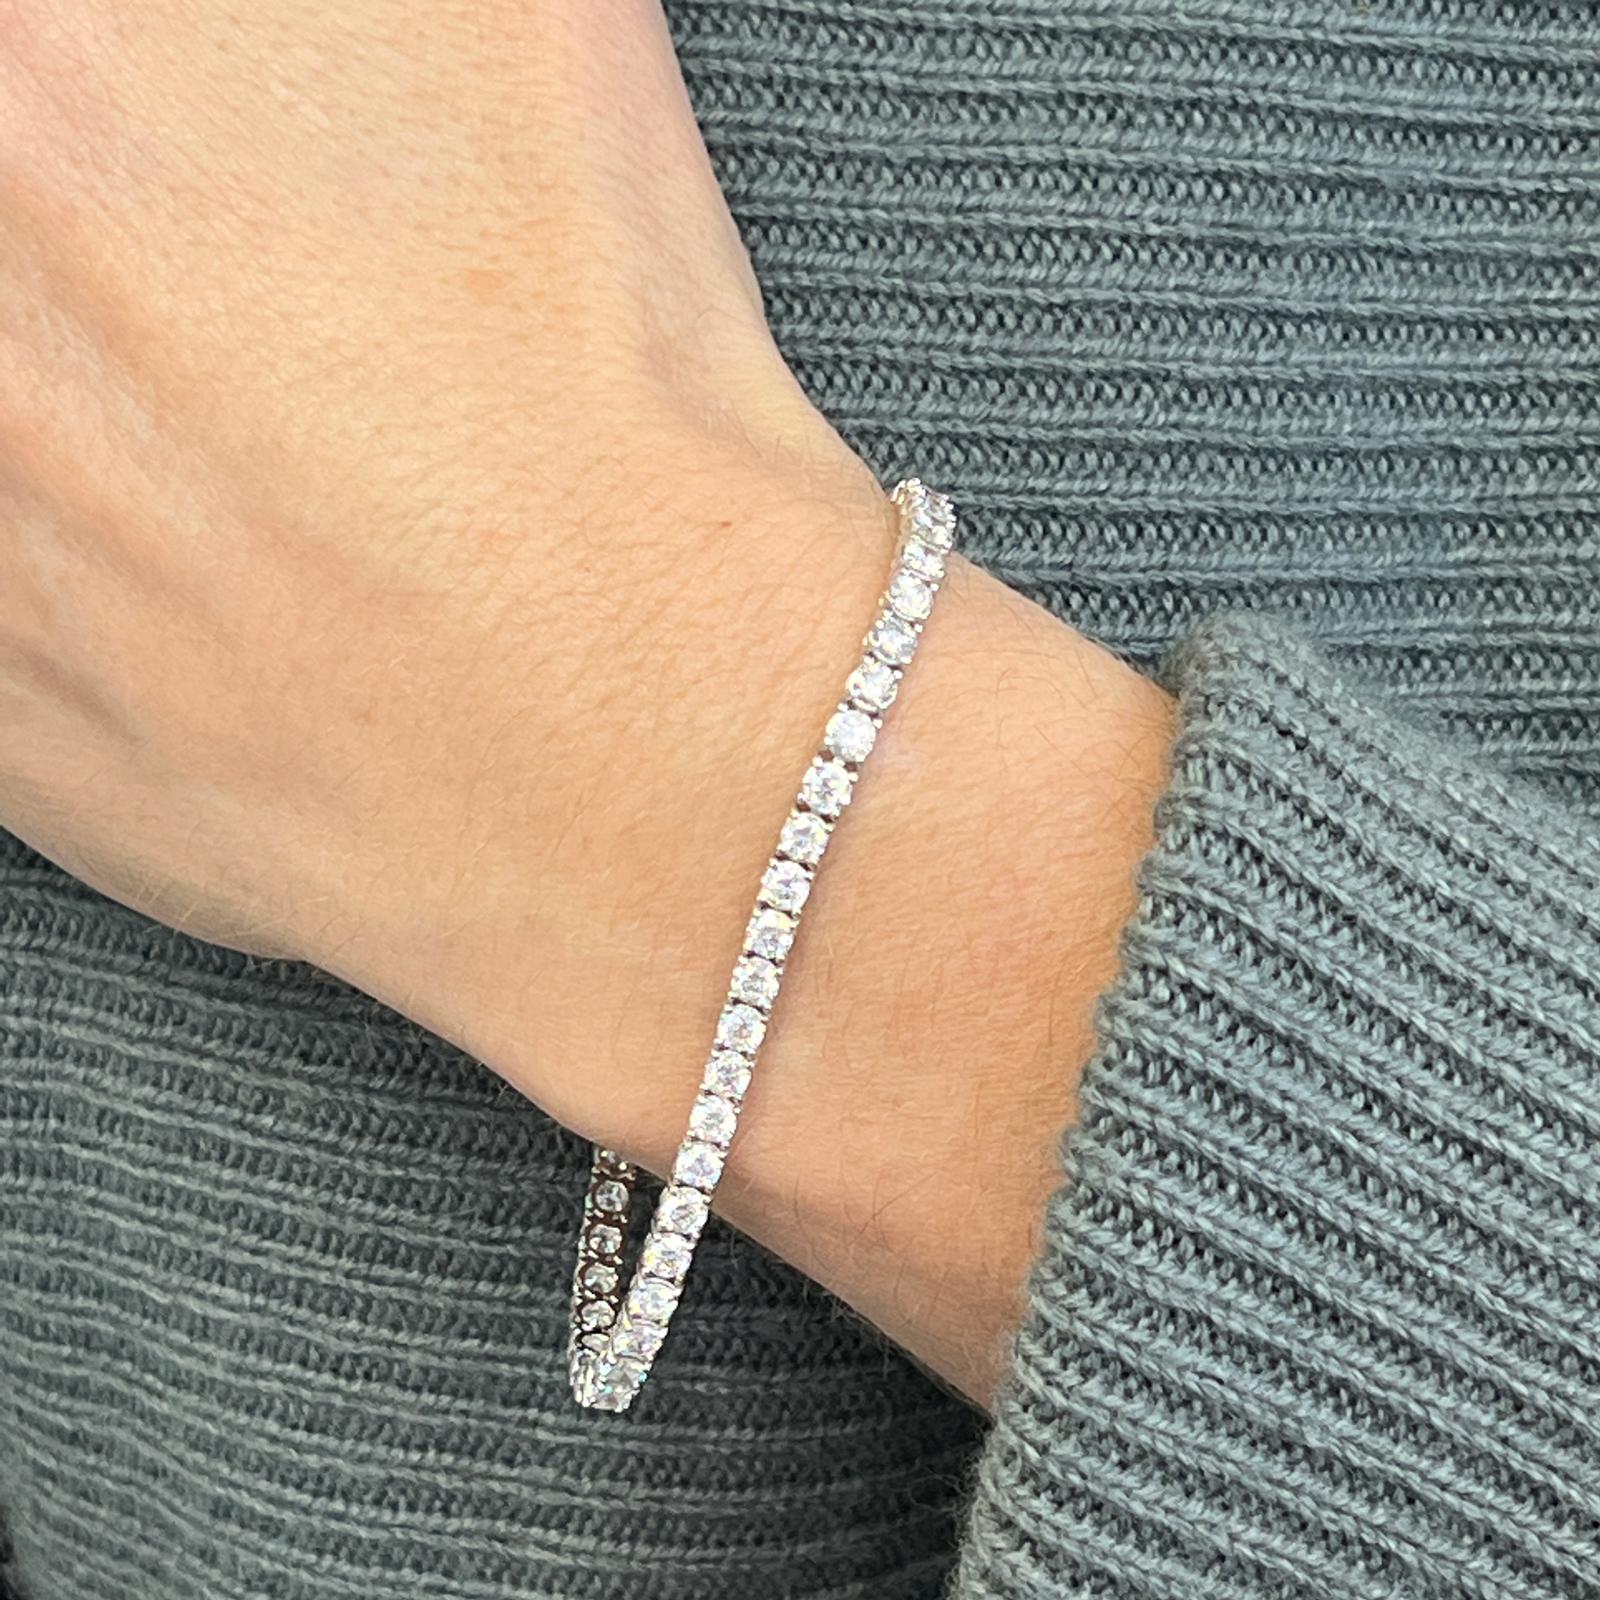 Sparkling diamond tennis bracelet fashioned in 14 karat white gold. The bracelet features 48 round brilliant cut diamonds weighing 6.48 carat total weight and graded G-H color and SI clarity. The bracelet measures 7.25 inches in length, 3.7mm in